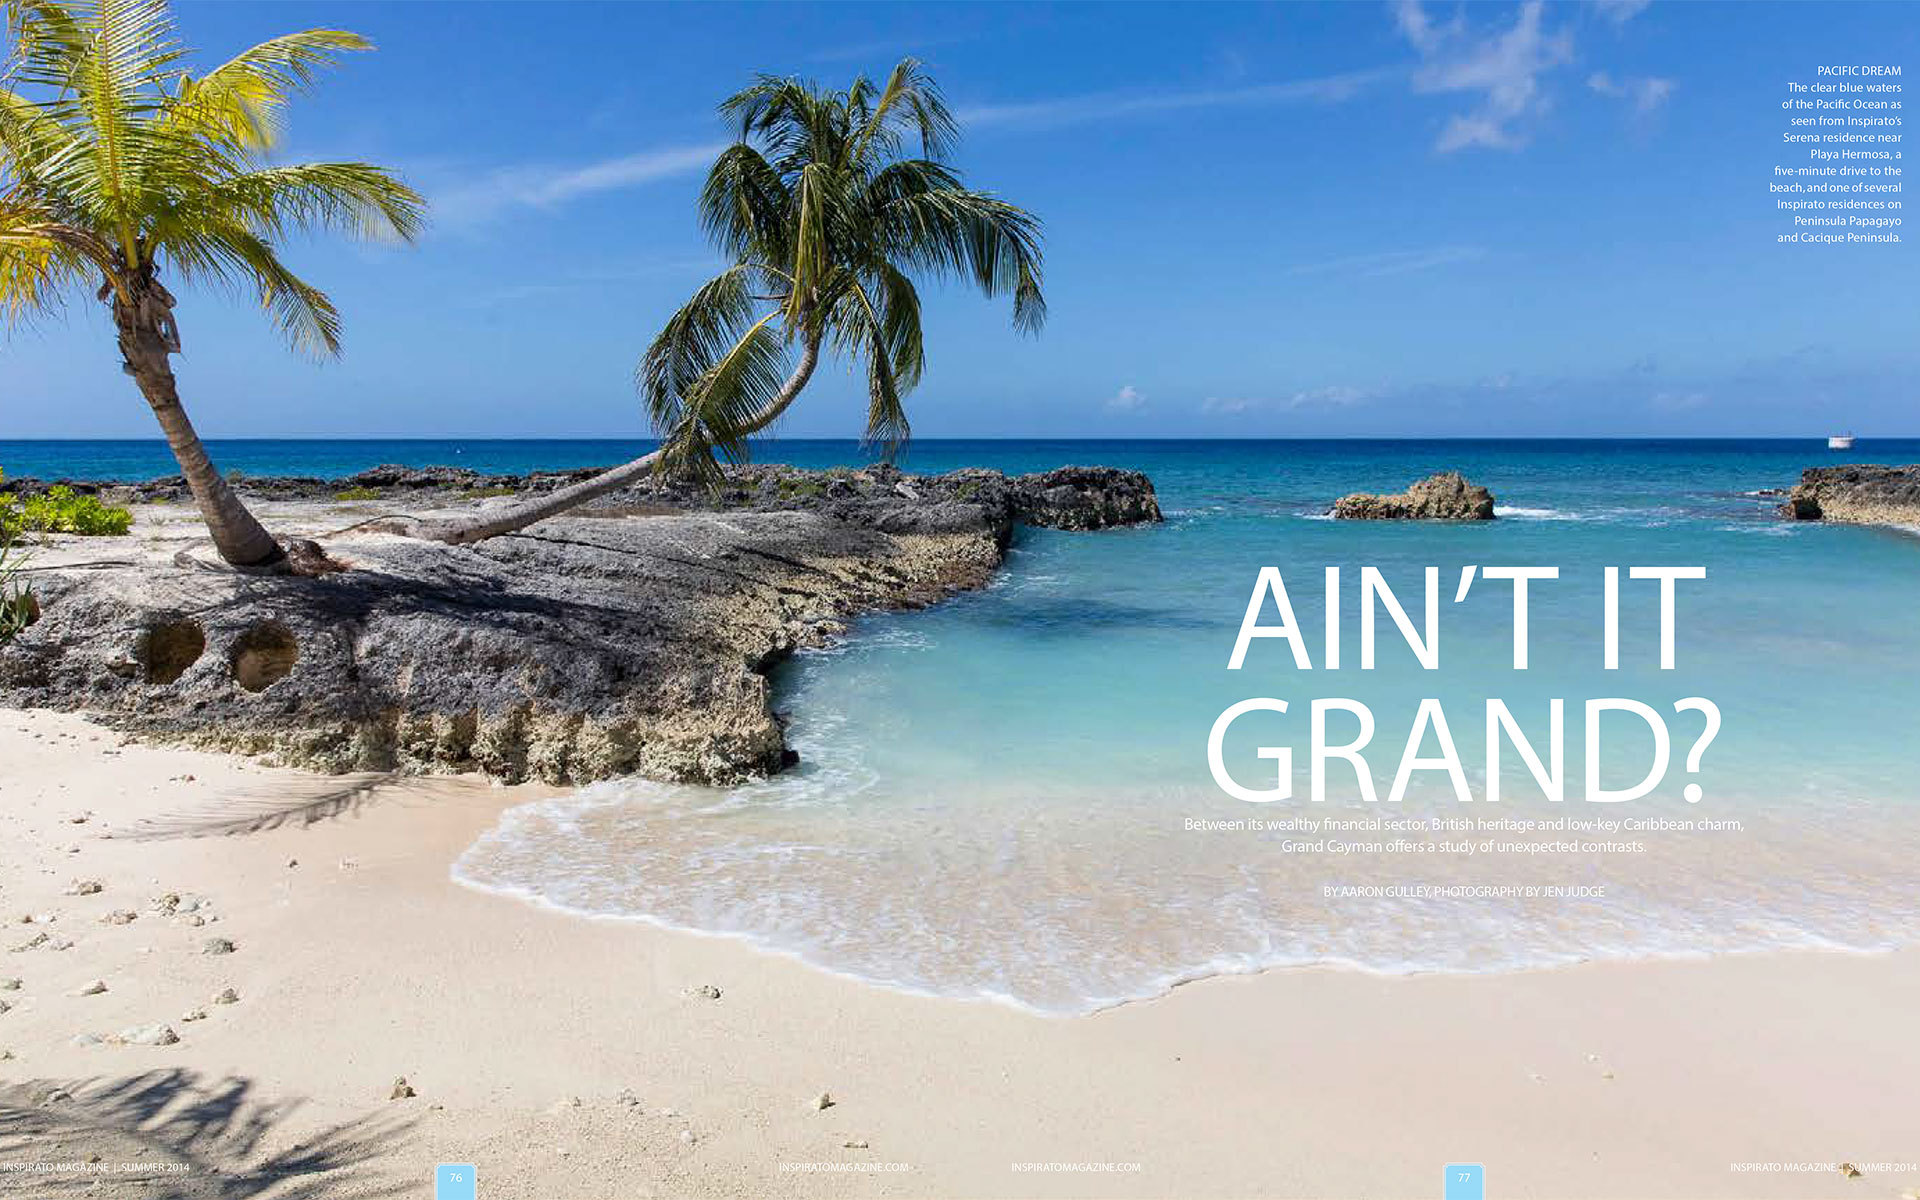 <p style="text-align: center;"><b><font color="2a2871">Ain't It Grand?, Inspirato, Summer 2014</font></b>
</p>
Between its wealthy financial sector, British heritage, and low-key Caribbean charm, Grand Cayman offers a study of unexpected contrasts.
<p style="text-align: center;"><a href="/users/AaronGulley18670/INS_Cayman_Summer14.pdf" onclick="window.open(this.href, '', 'resizable=no,status=no,location=no,toolbar=no,menubar=no,fullscreen=no,scrollbars=no,dependent=no,width=900'); return false;">Read the Story</a></p>